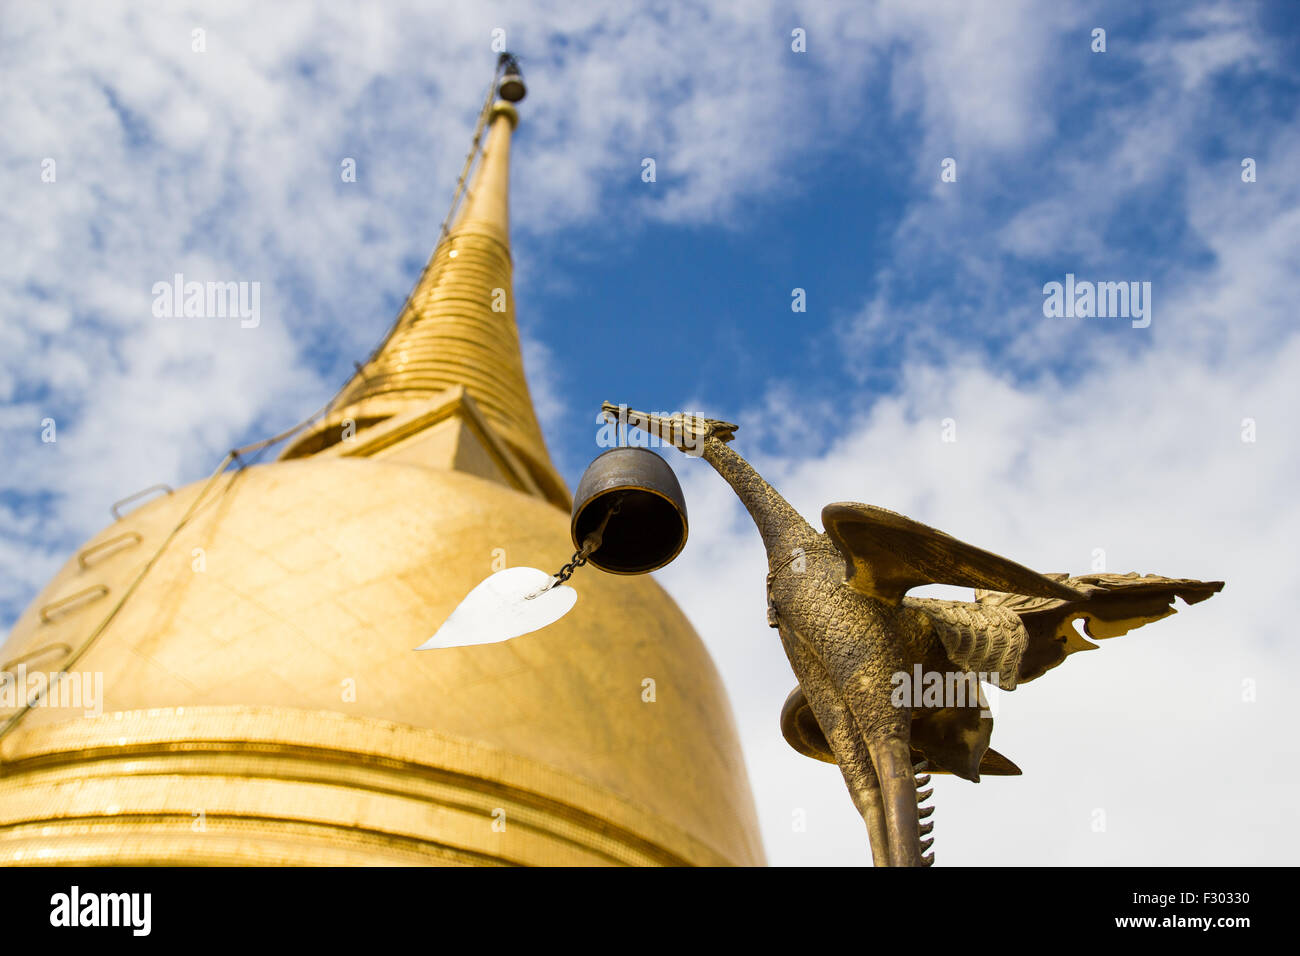 Kinnaree, Mythical female bird  with bell in mount in Golden mount, Bangkok, Thailand Stock Photo